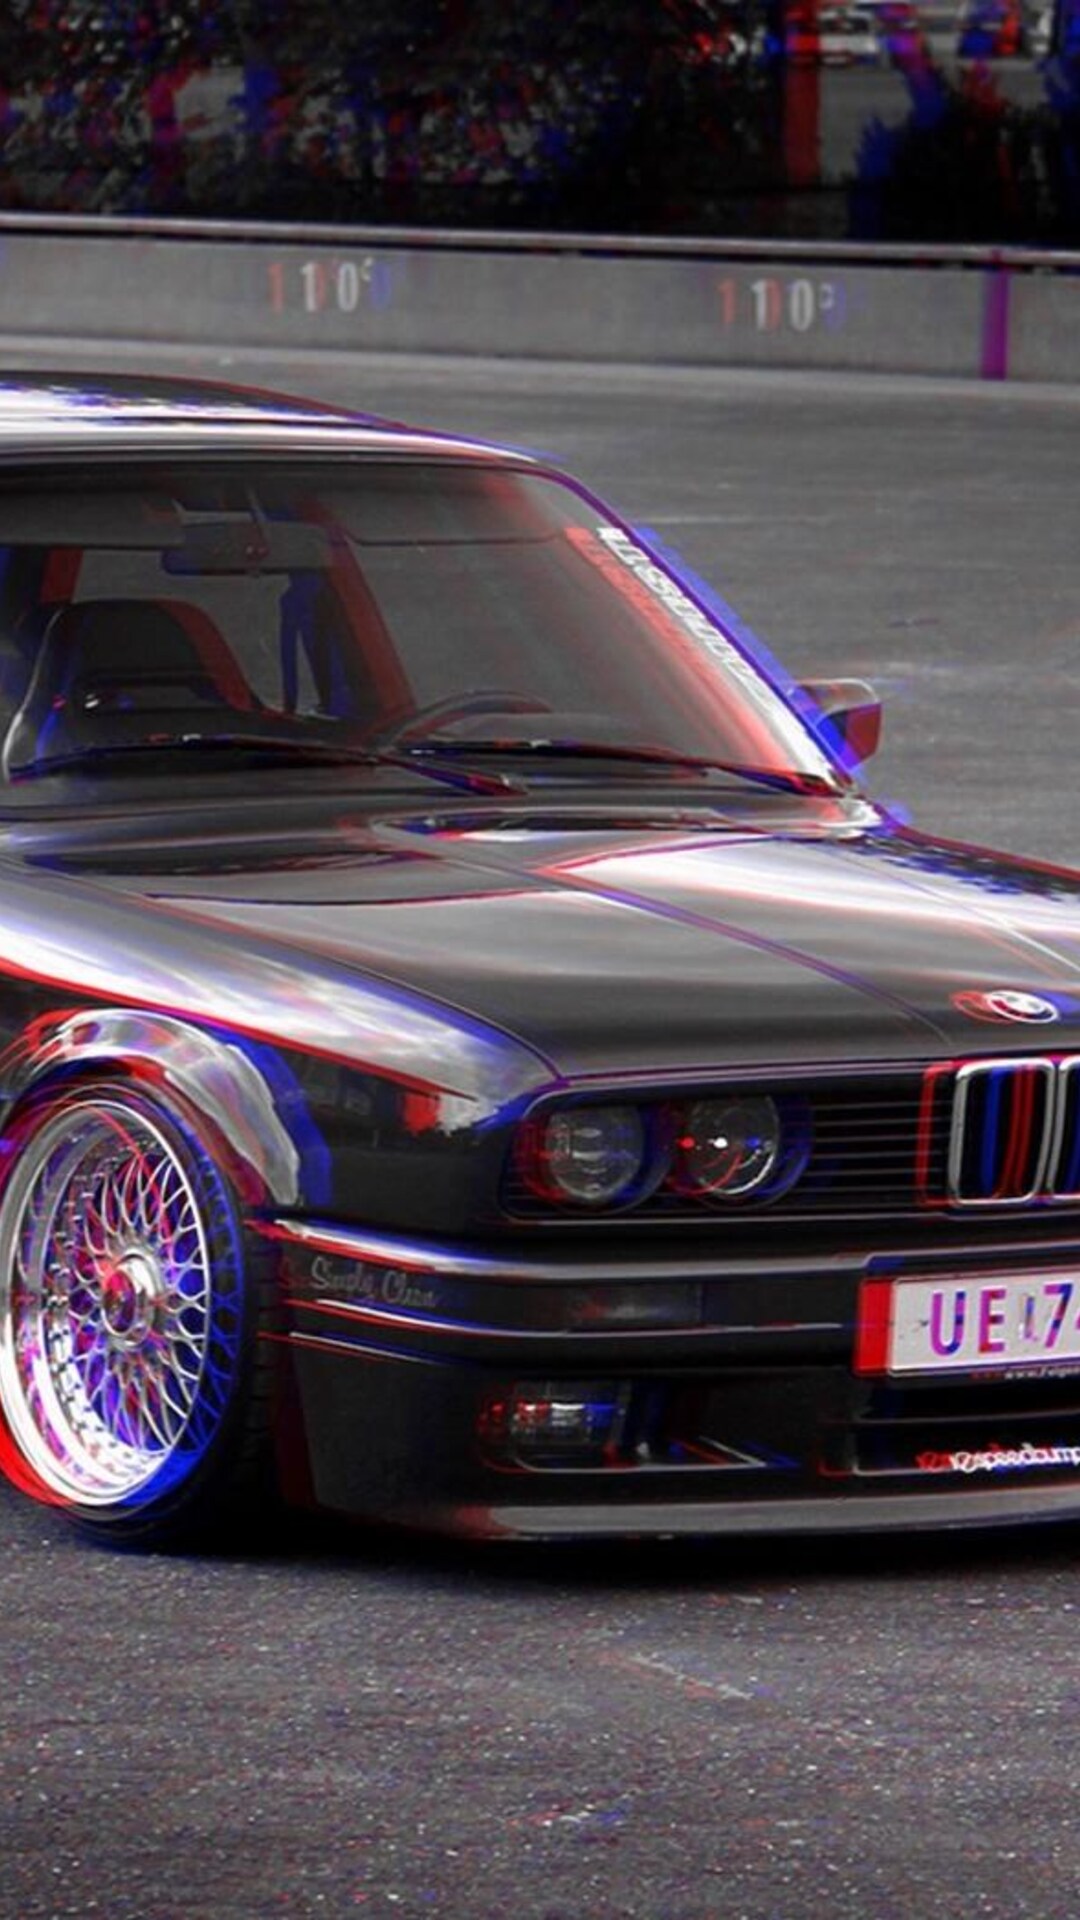 1080x1920 BMW E30 3d Iphone 7,6s,6 Plus, Pixel xl ,One Plus 3,3t,5 HD 4k Wallpapers, Images ...